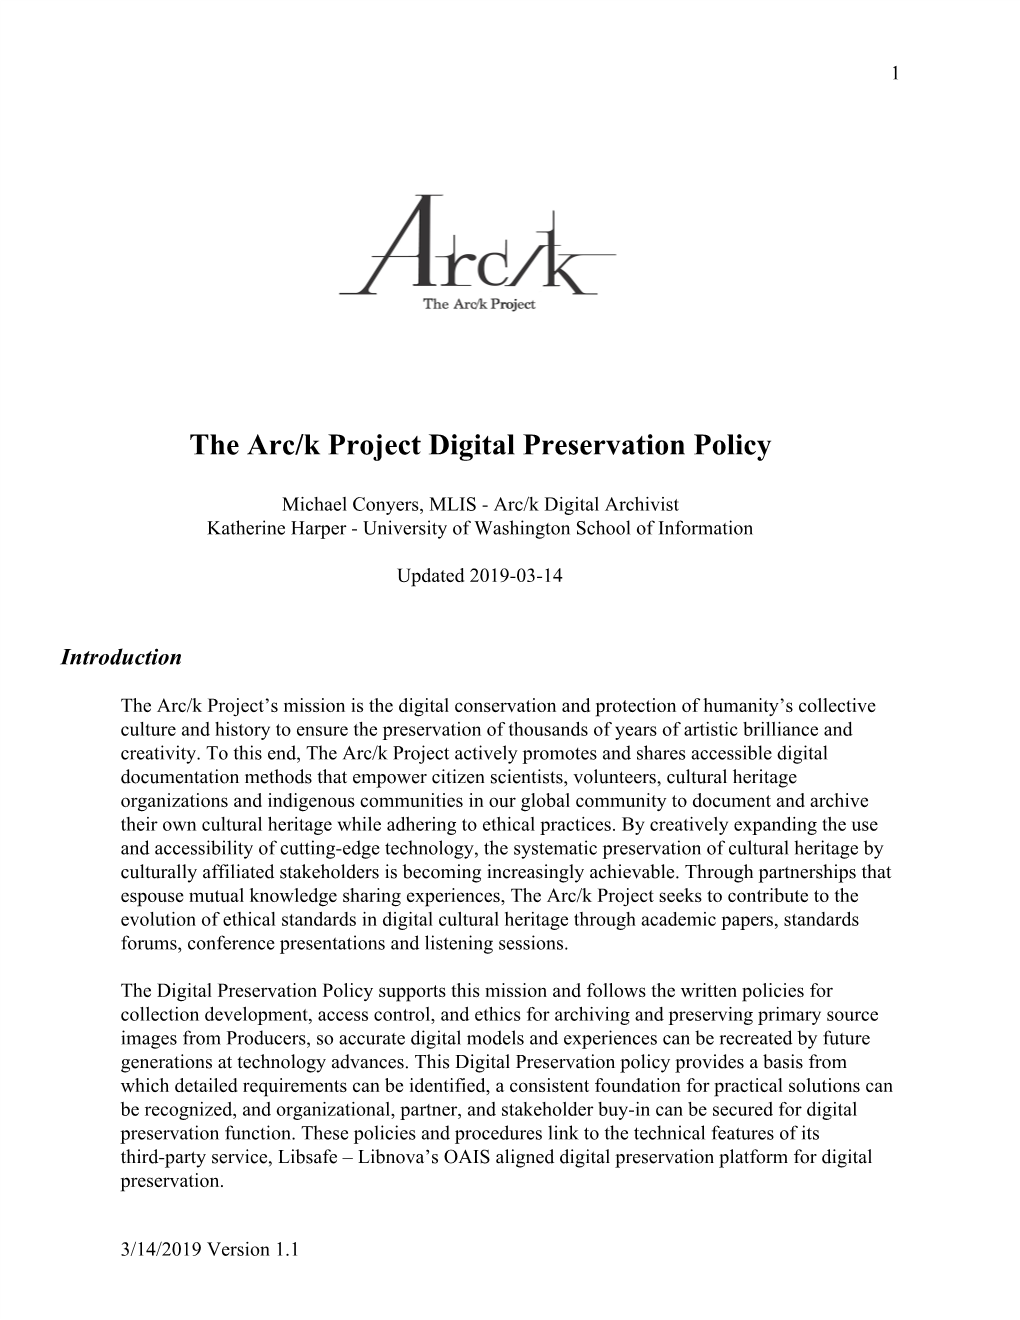 The Arc/K Project Digital Preservation Policy